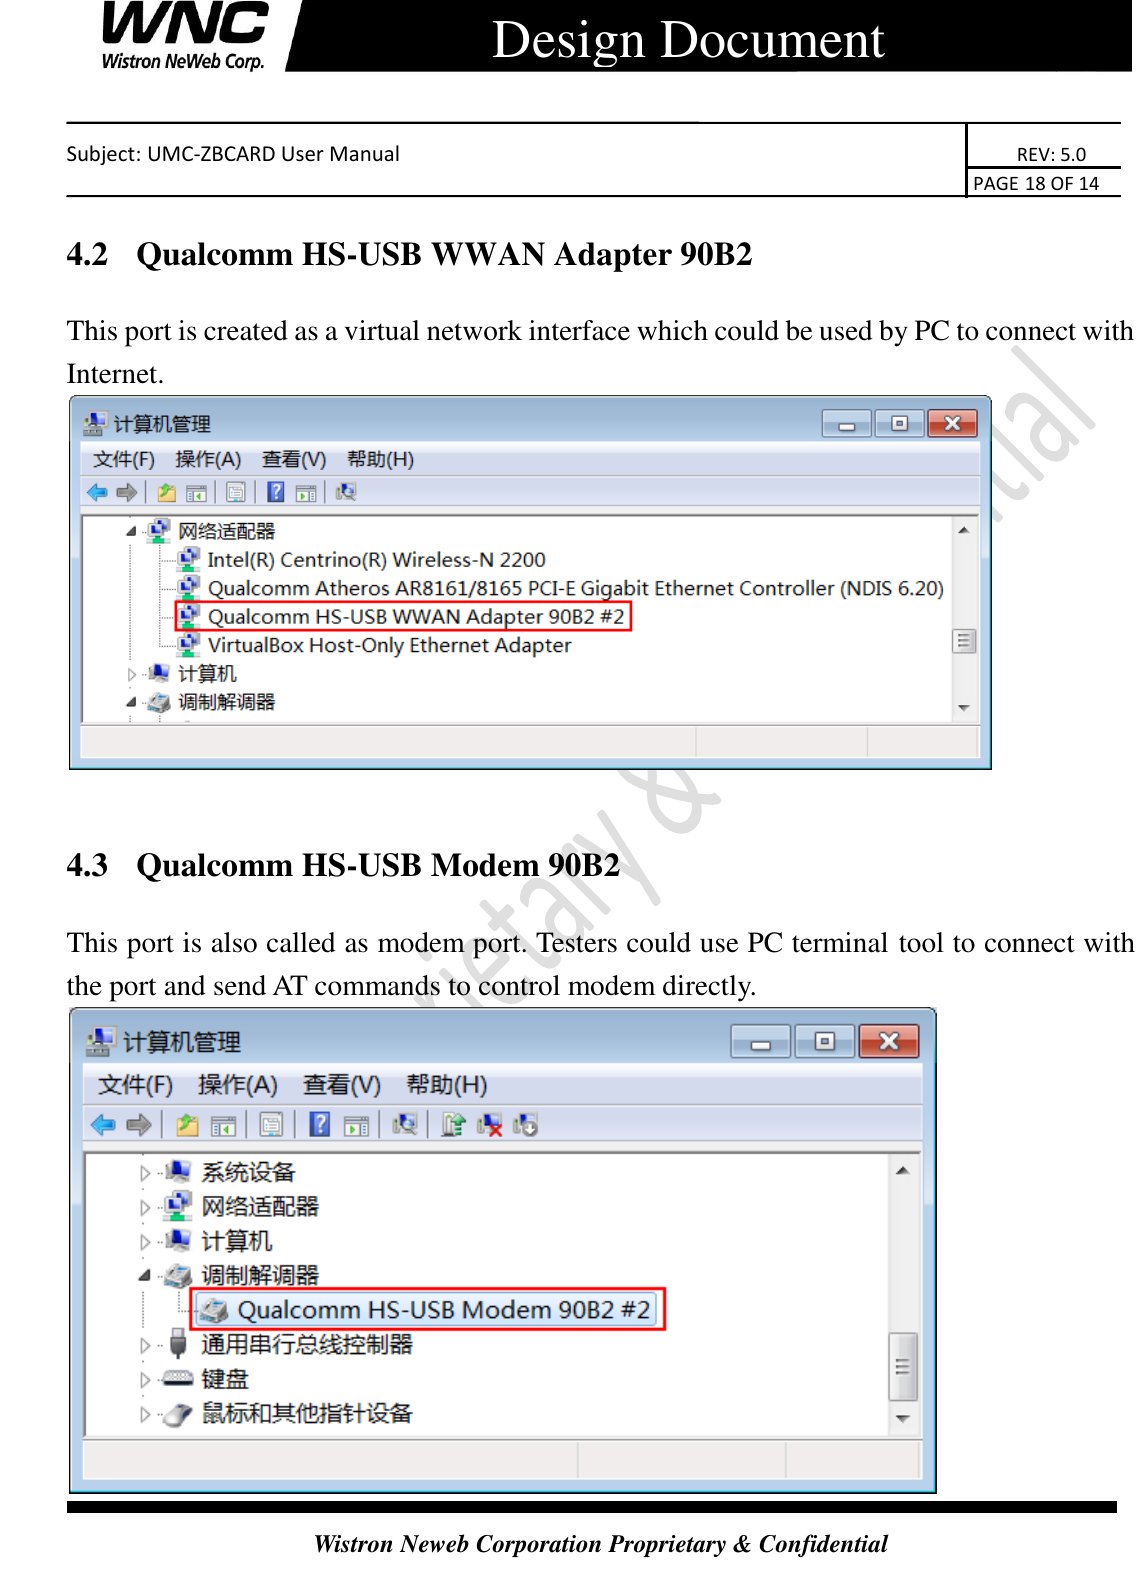    Subject: UMC-ZBCARD User Manual                                                                      REV: 5.0                                                                                        PAGE 18 OF 14  Wistron Neweb Corporation Proprietary &amp; Confidential      Design Document 4.2   Qualcomm HS-USB WWAN Adapter 90B2 This port is created as a virtual network interface which could be used by PC to connect with Internet.   4.3   Qualcomm HS-USB Modem 90B2 This port is also called as modem port. Testers could use PC terminal tool to connect with the port and send AT commands to control modem directly.  